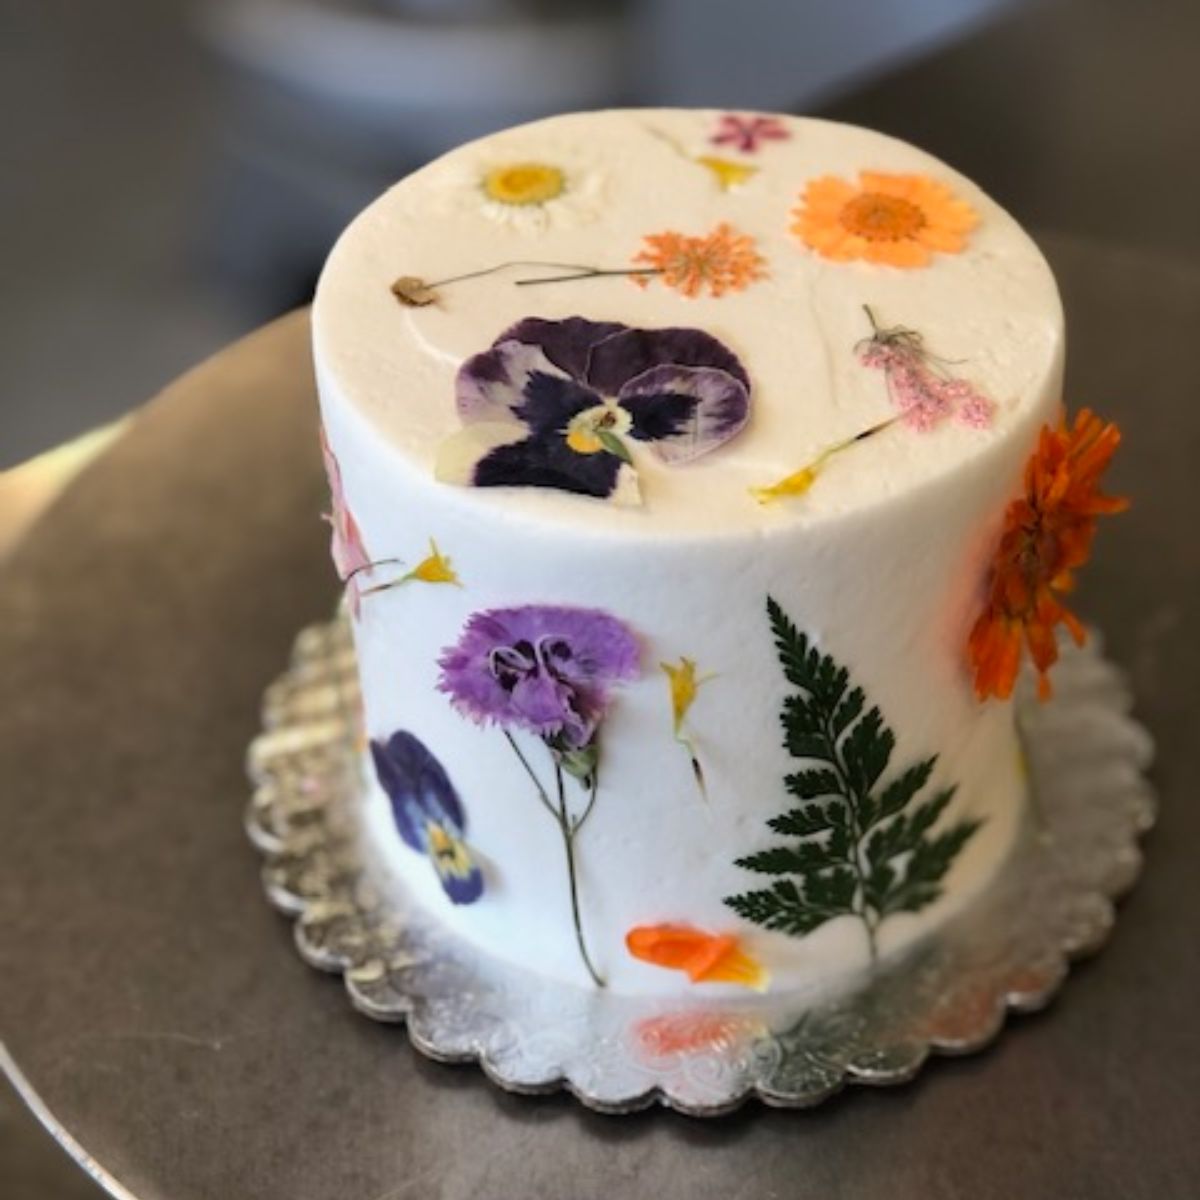 Decorate a cake using edible flowers, Edible flower cakes